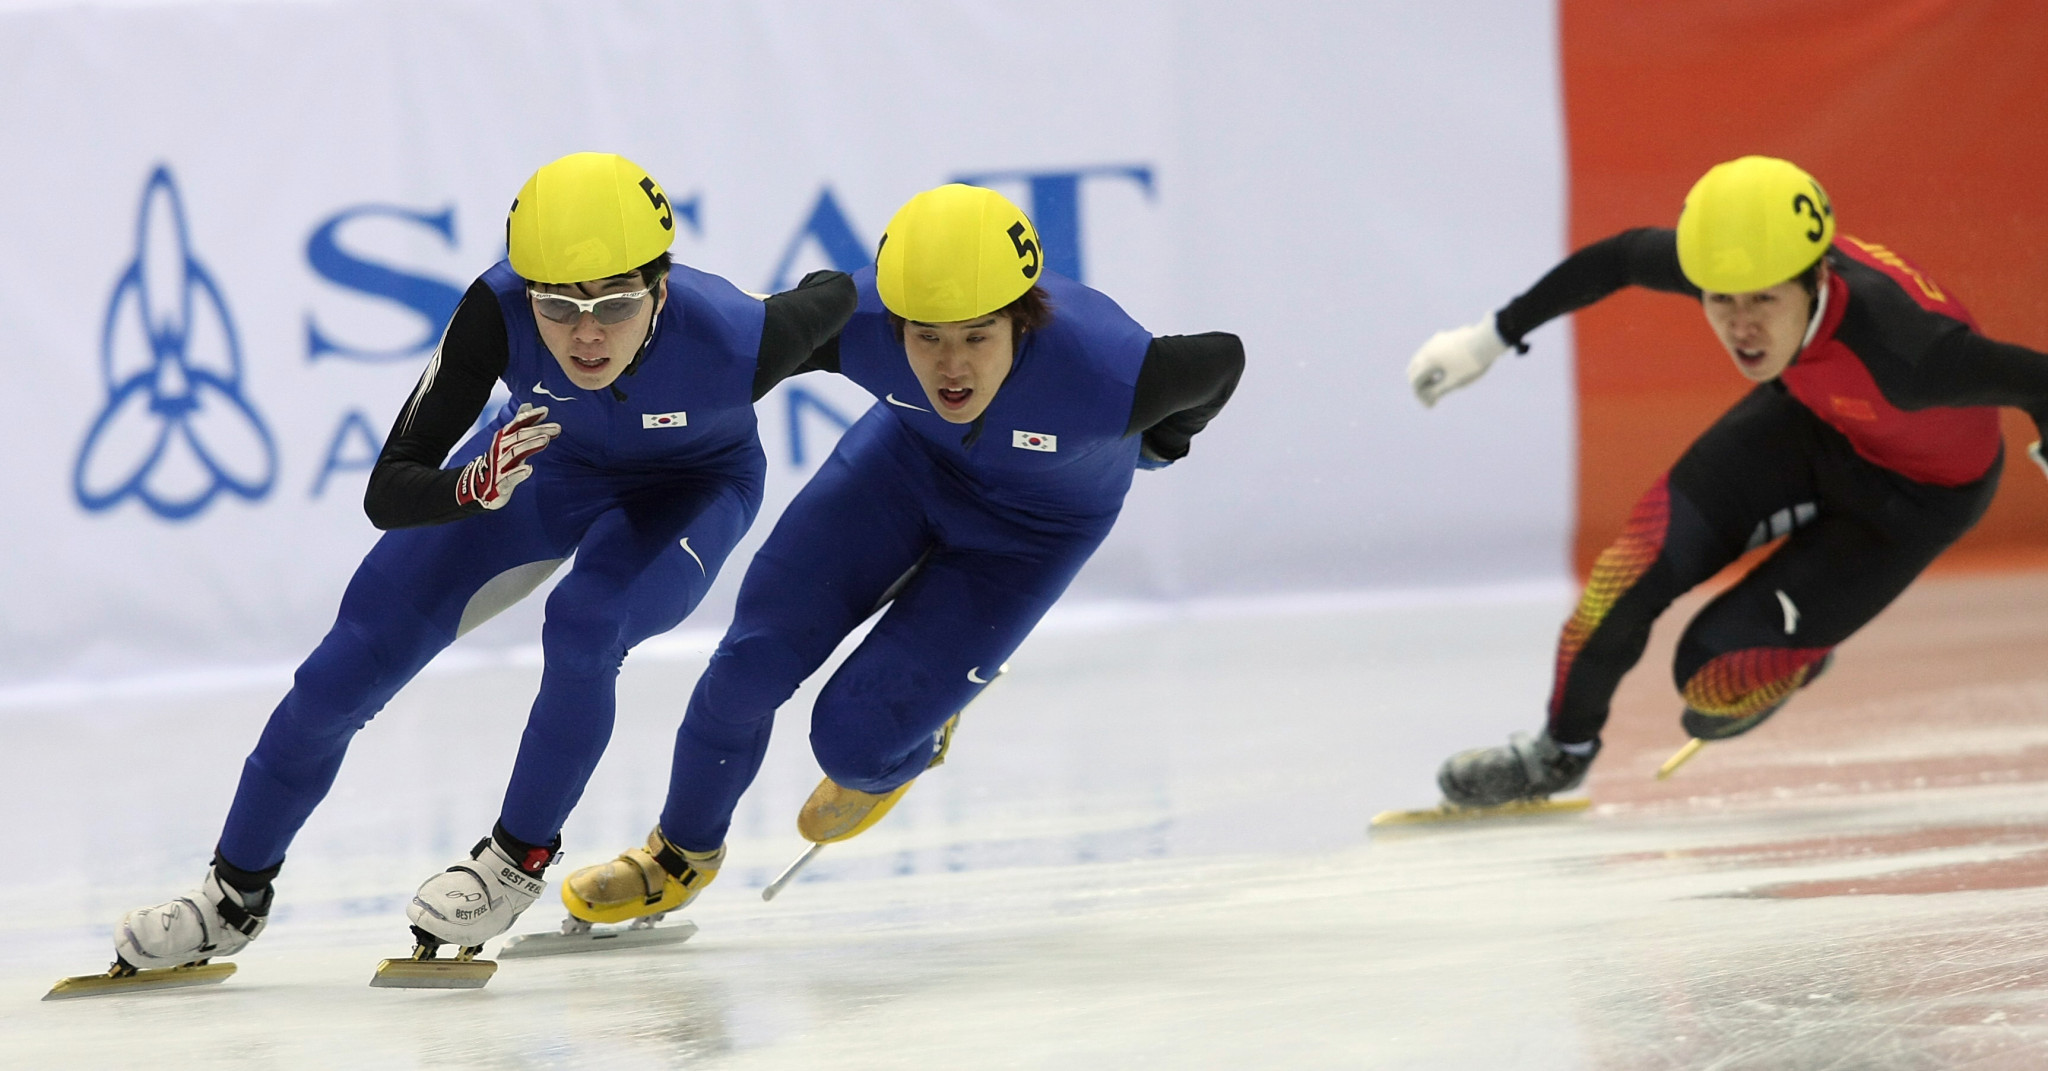 South Korean one-two in men's mass start final at Heerenveen Speed Skating World Cup